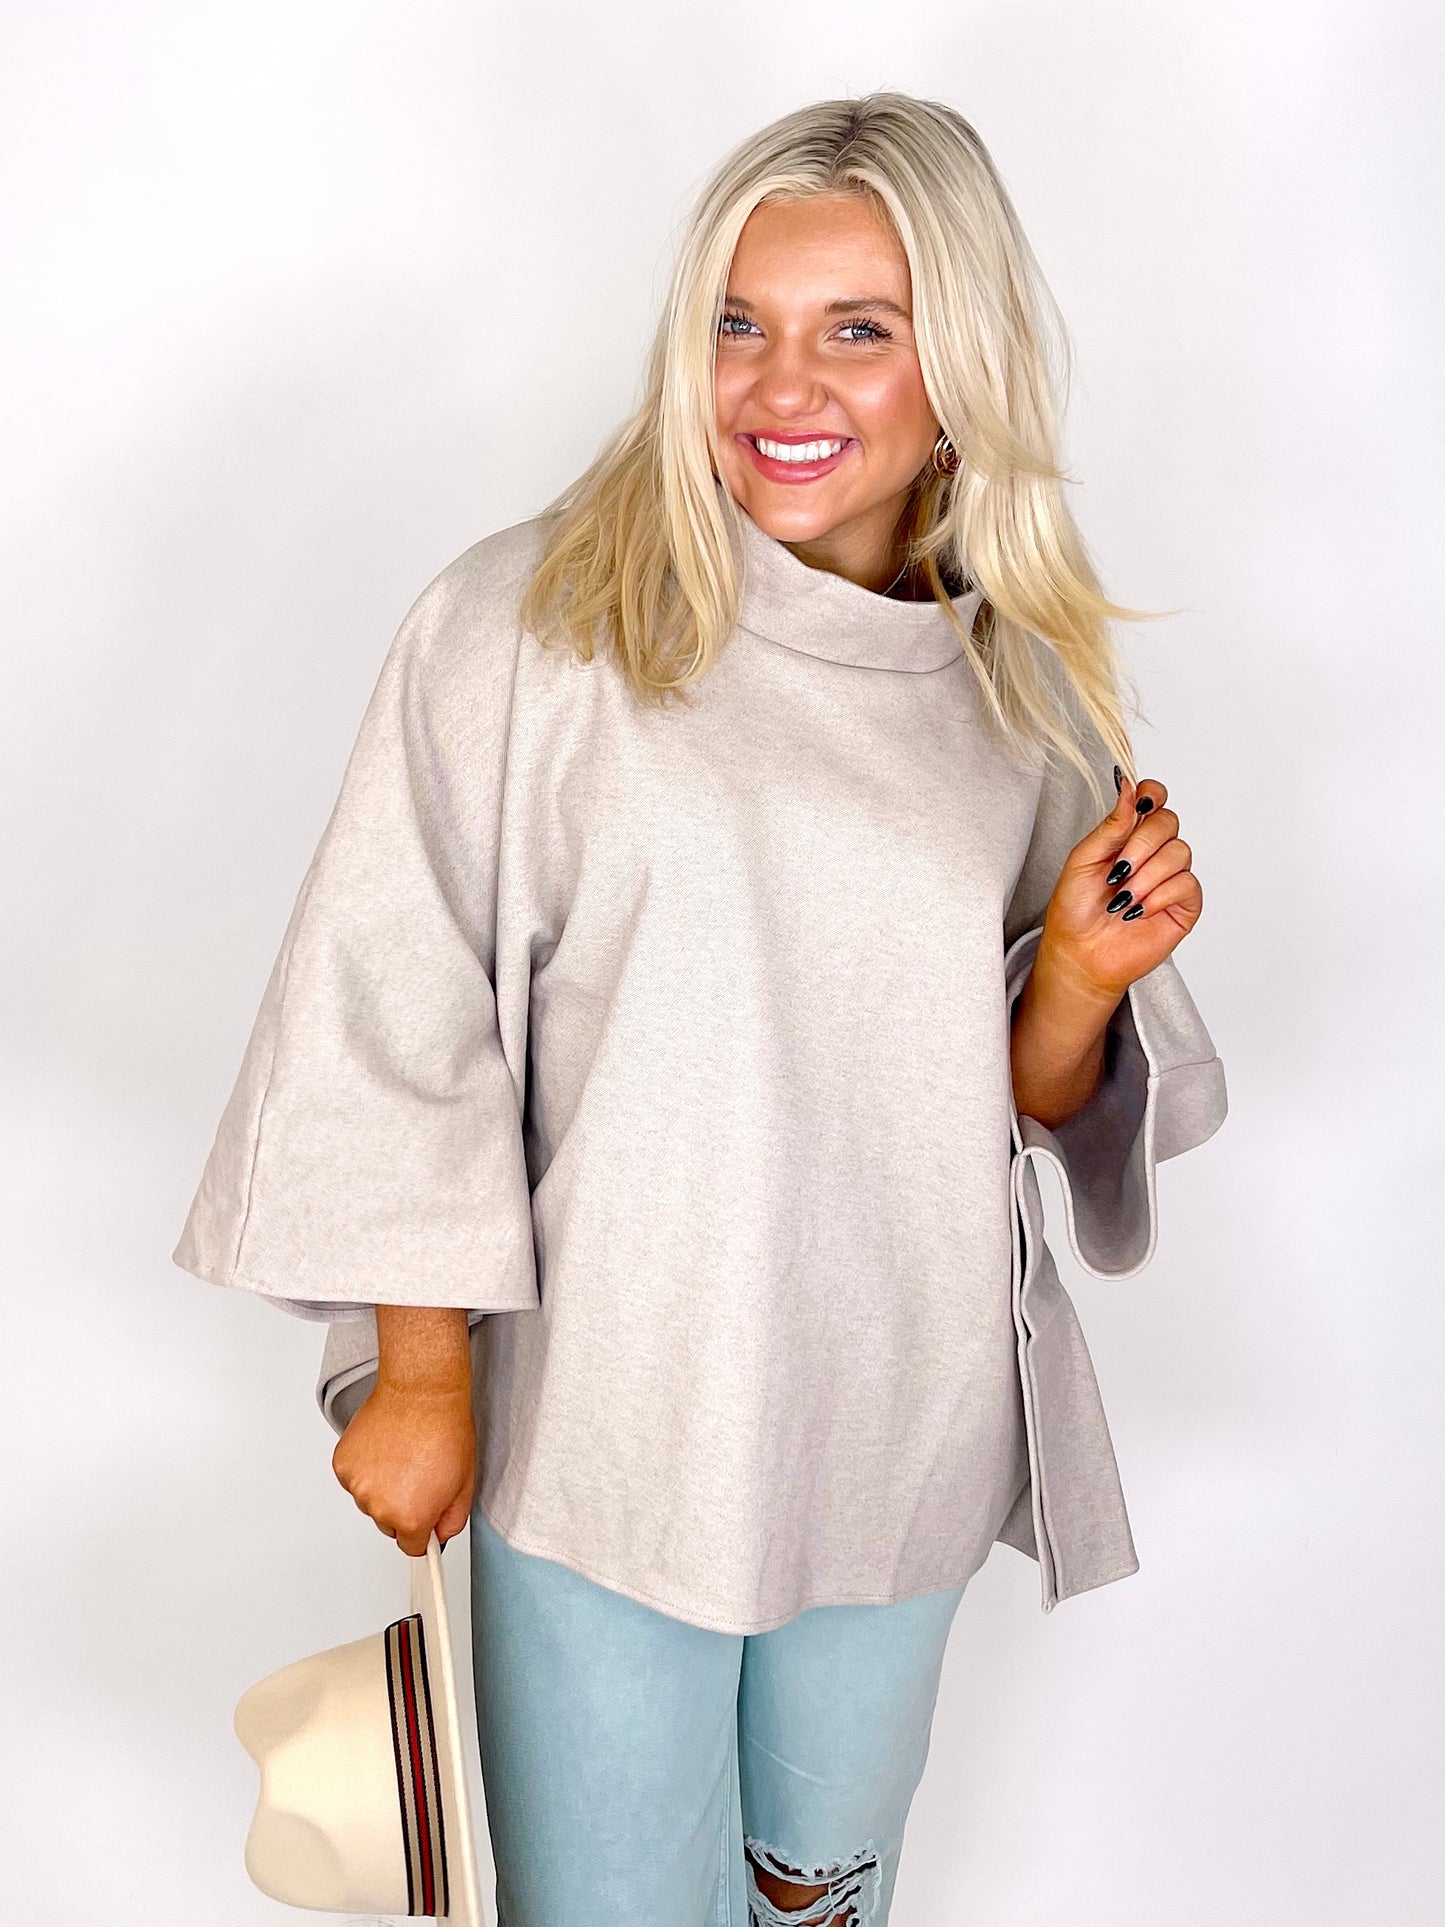 The Camden Poncho-Poncho-Wishlist-The Village Shoppe, Women’s Fashion Boutique, Shop Online and In Store - Located in Muscle Shoals, AL.